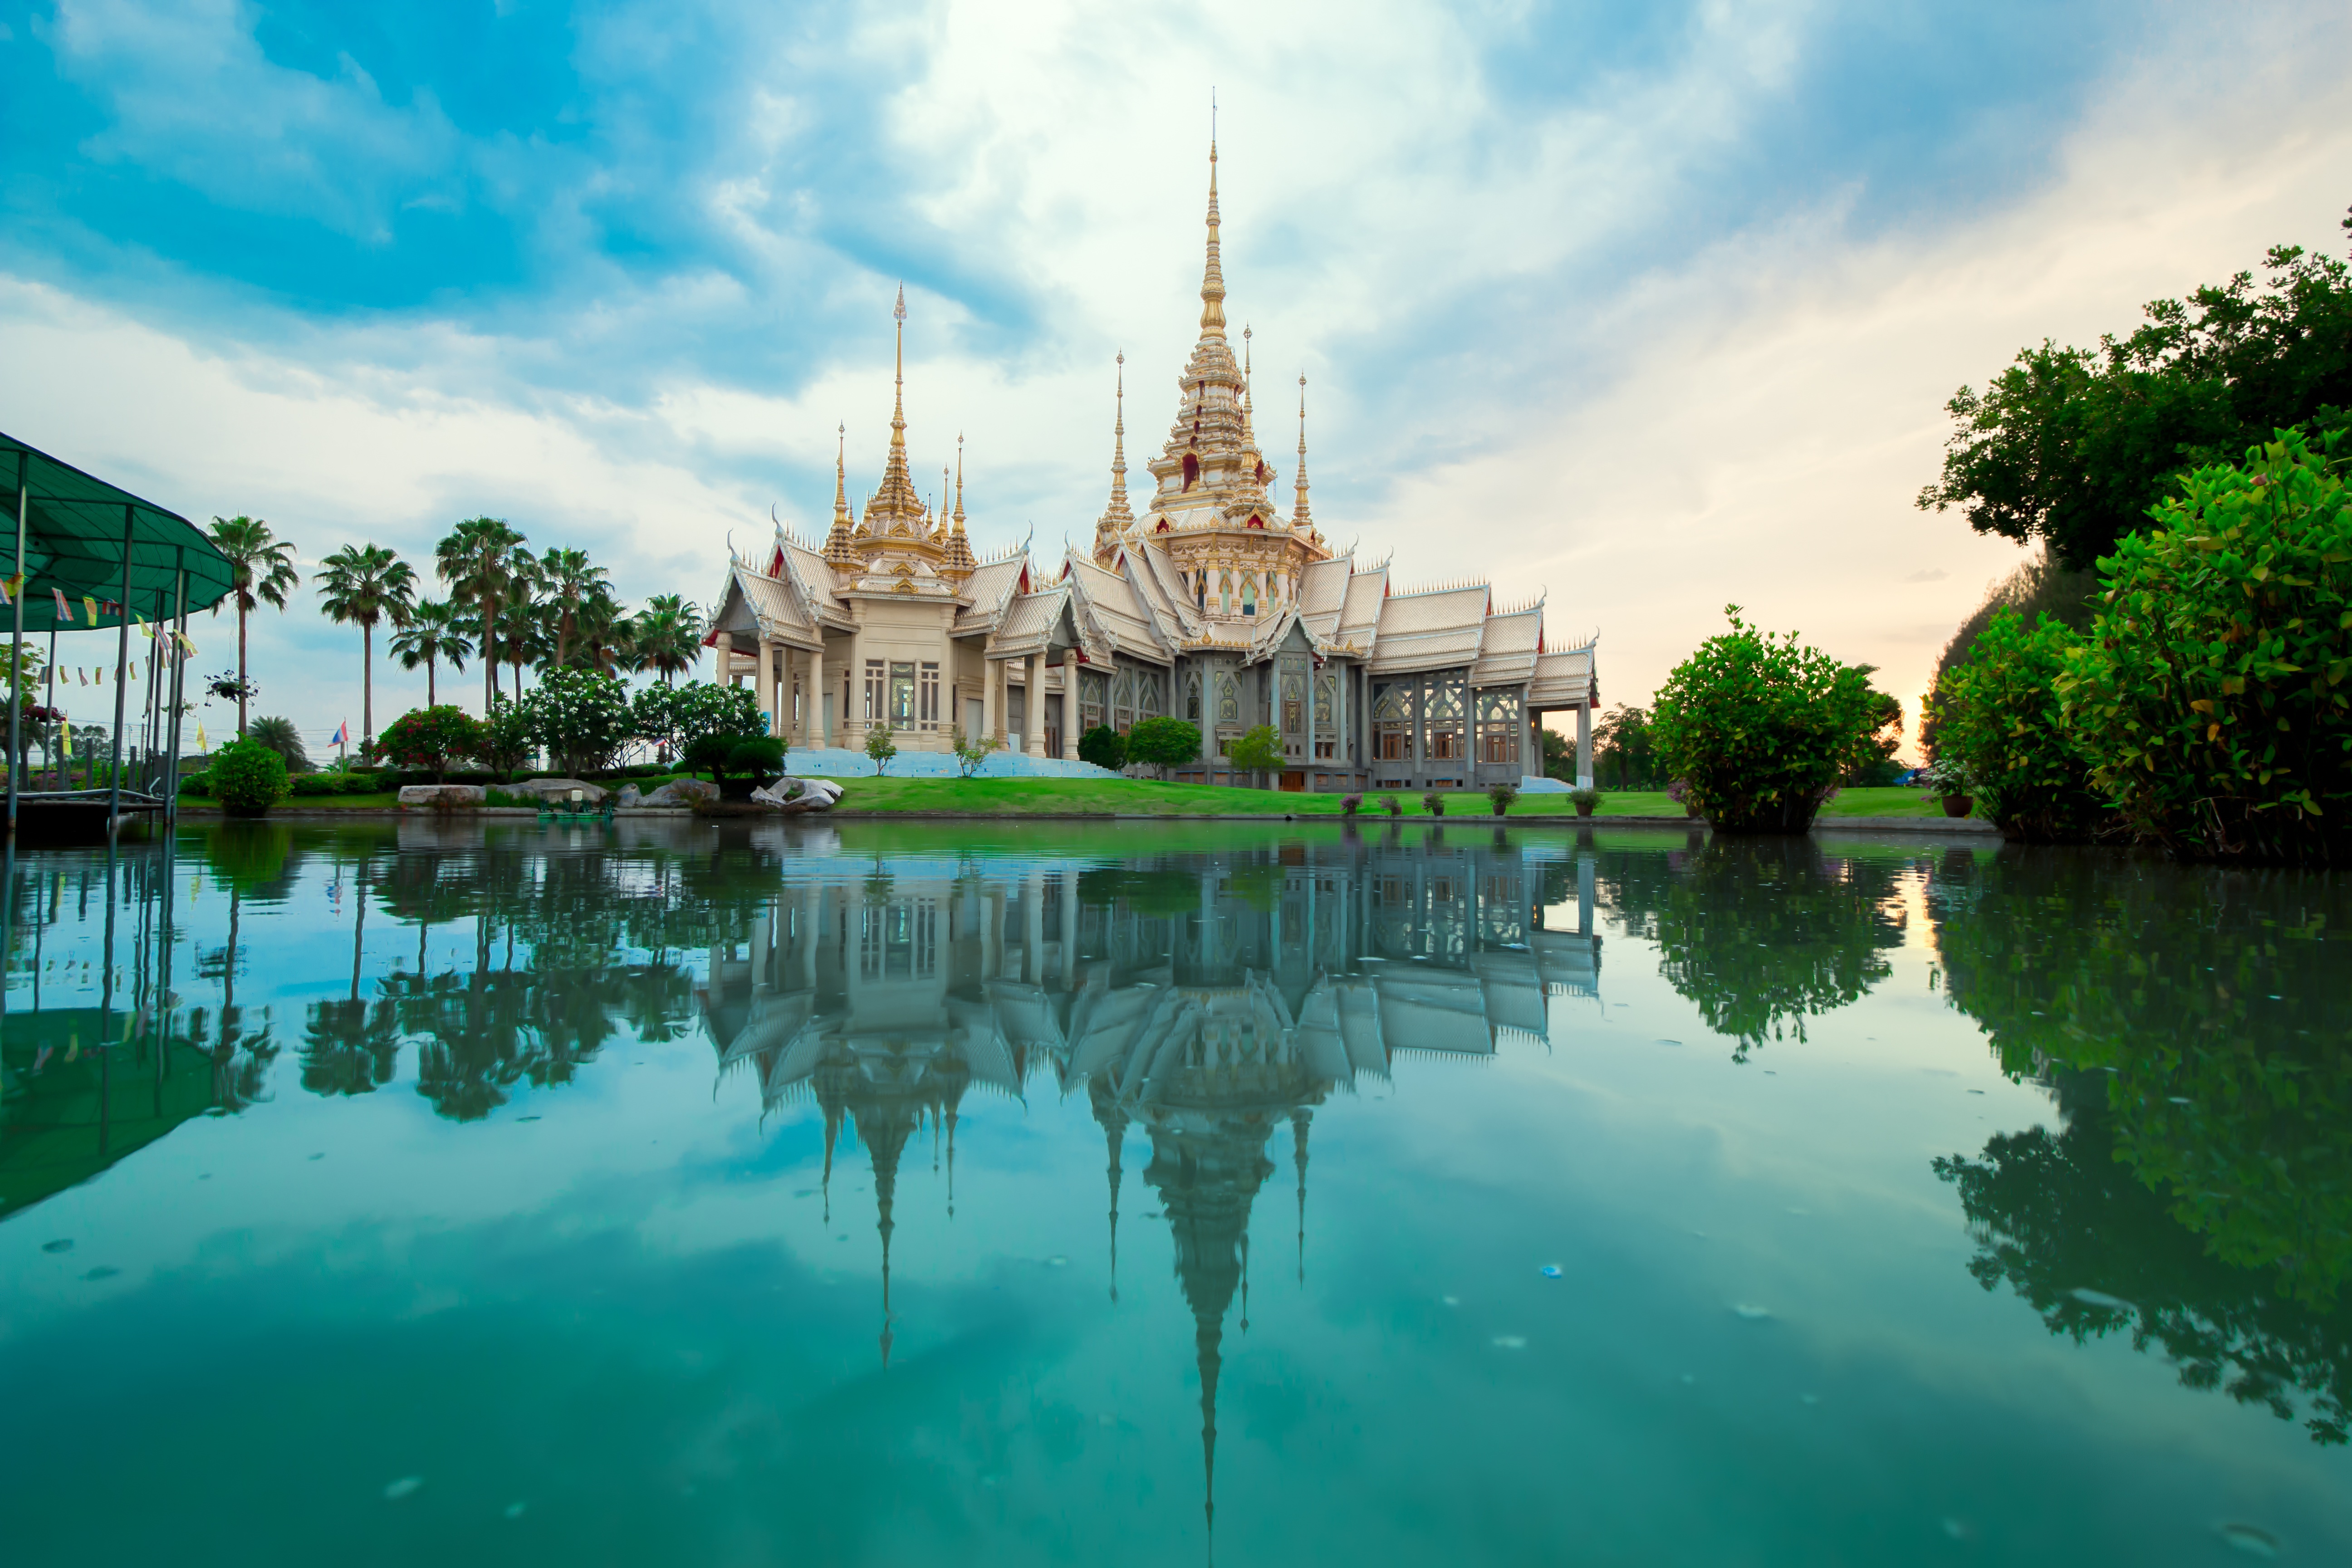 @projectfairytale A Country-by-Country Guide to Southeast Asia